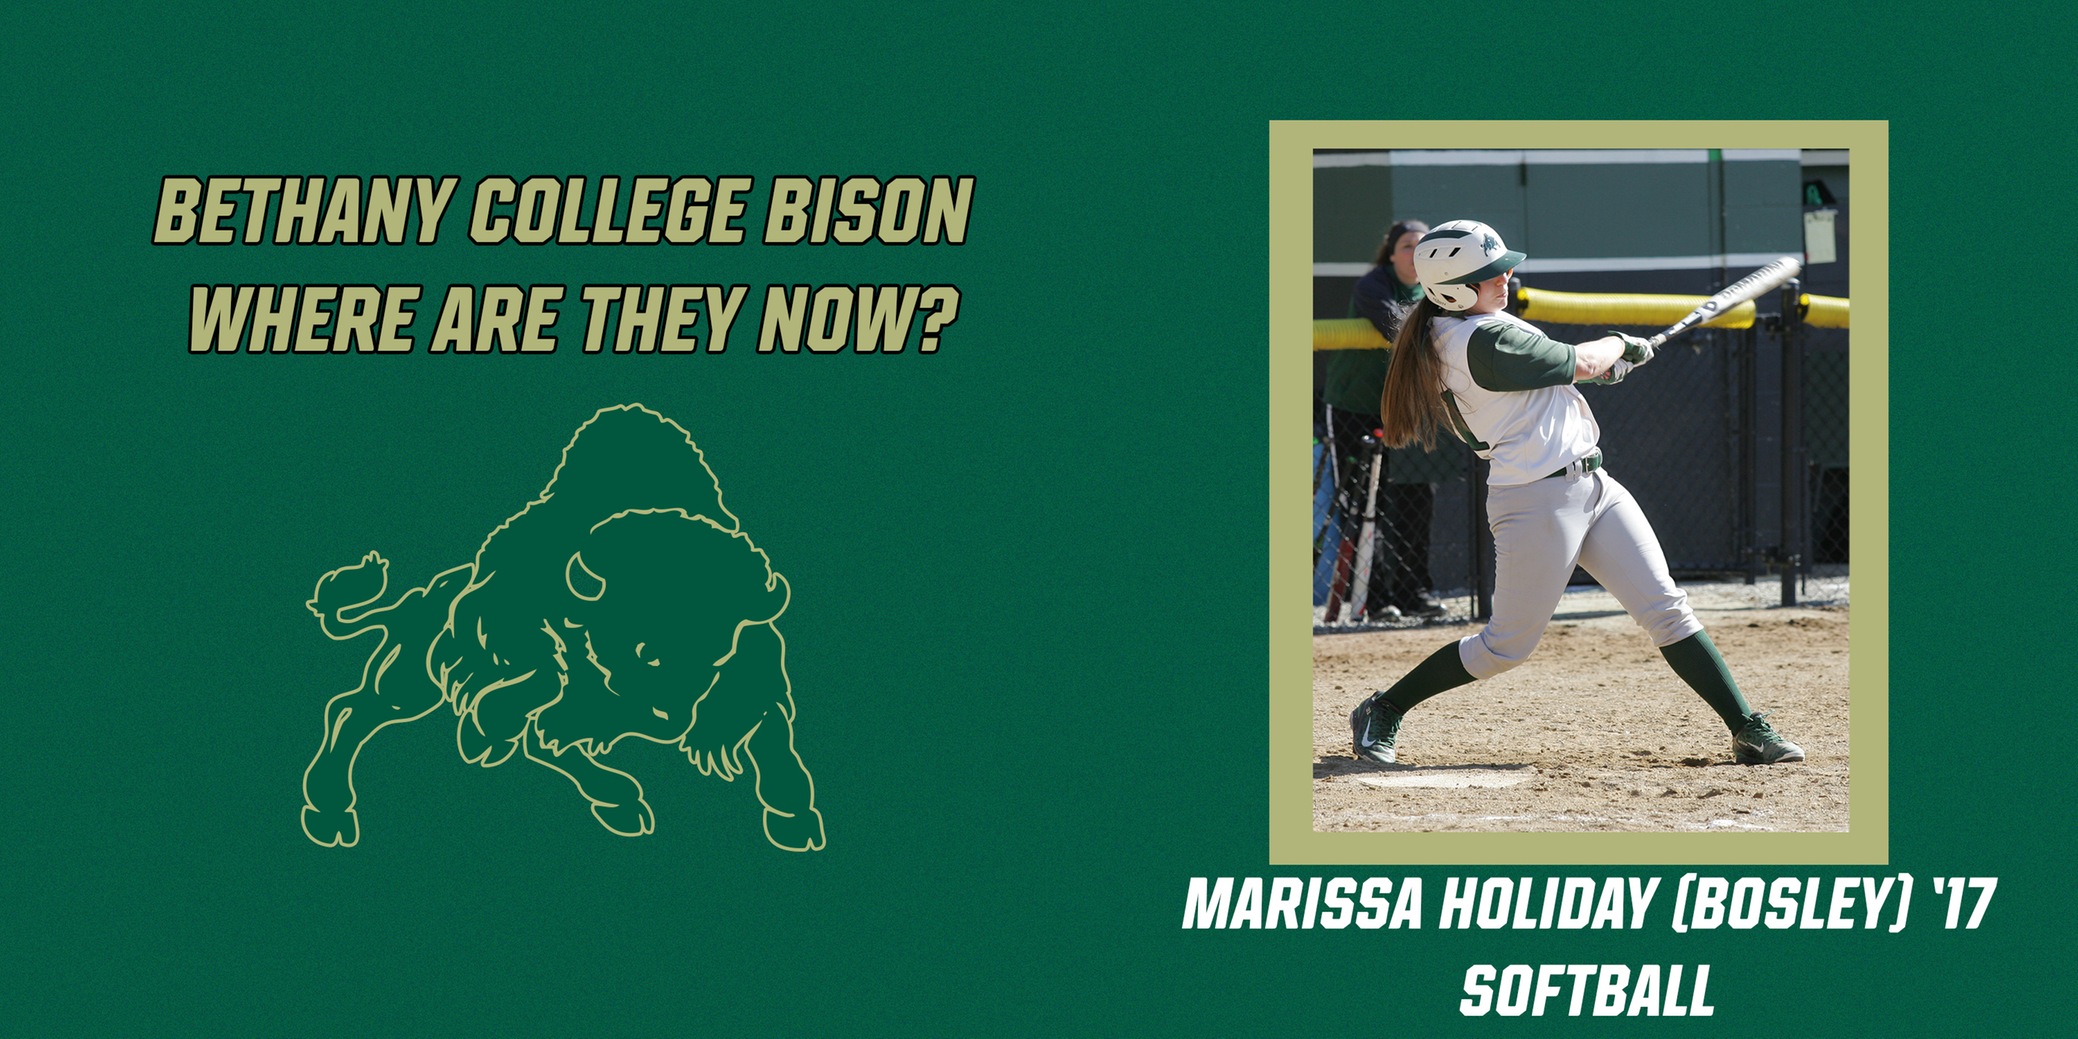 Where Are They Now Series - Marissa Holiday (Bosley) '17, Softball